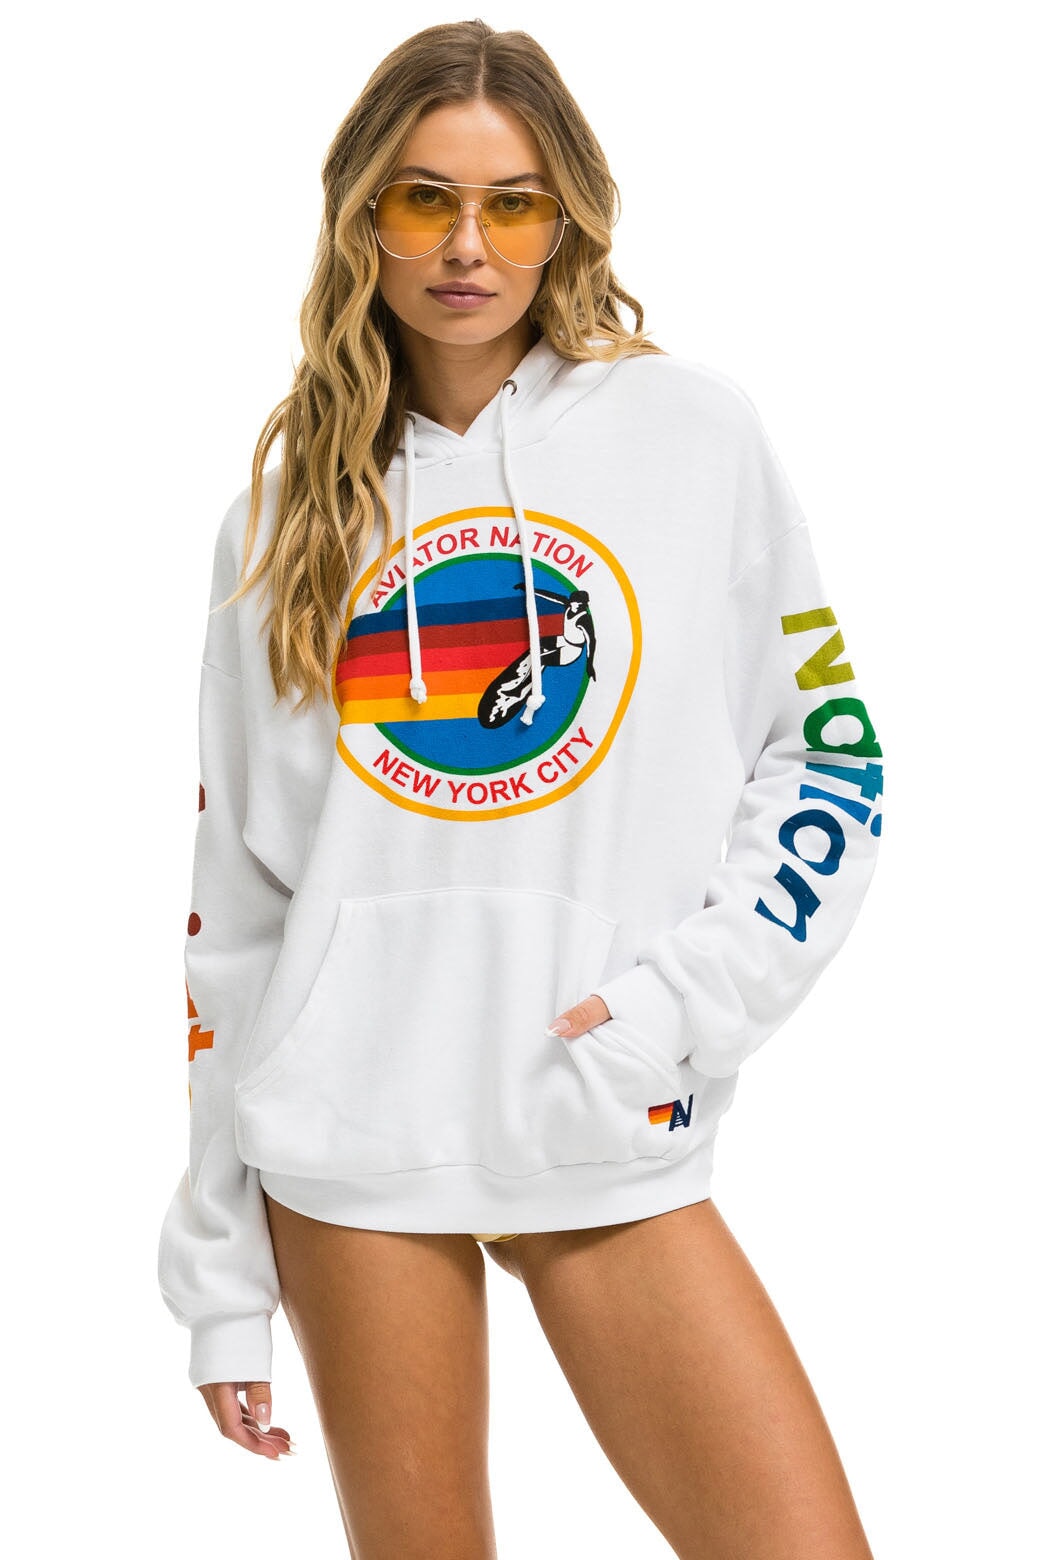 AVIATOR NATION NEW YORK CITY RELAXED PULLOVER HOODIE - WHITE Hoodie Aviator Nation 